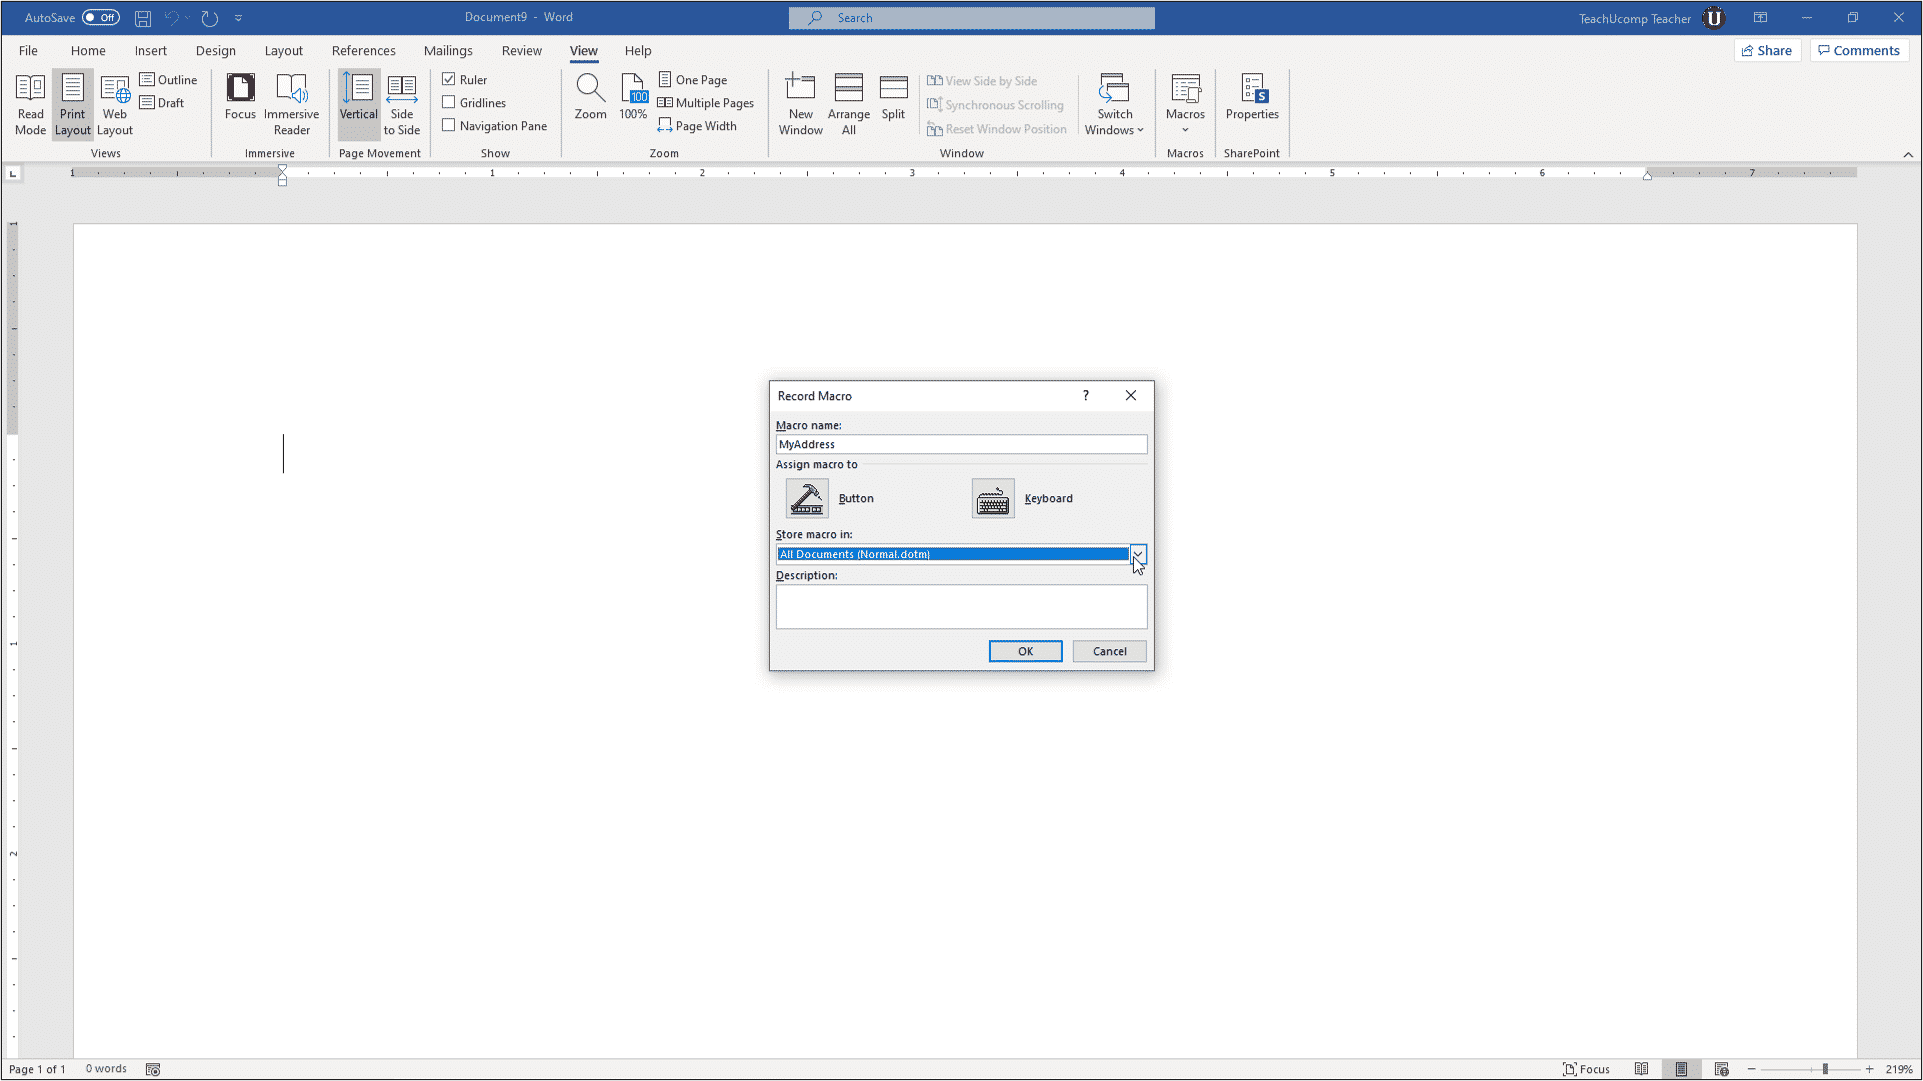 disable macros on office 2016 for mac